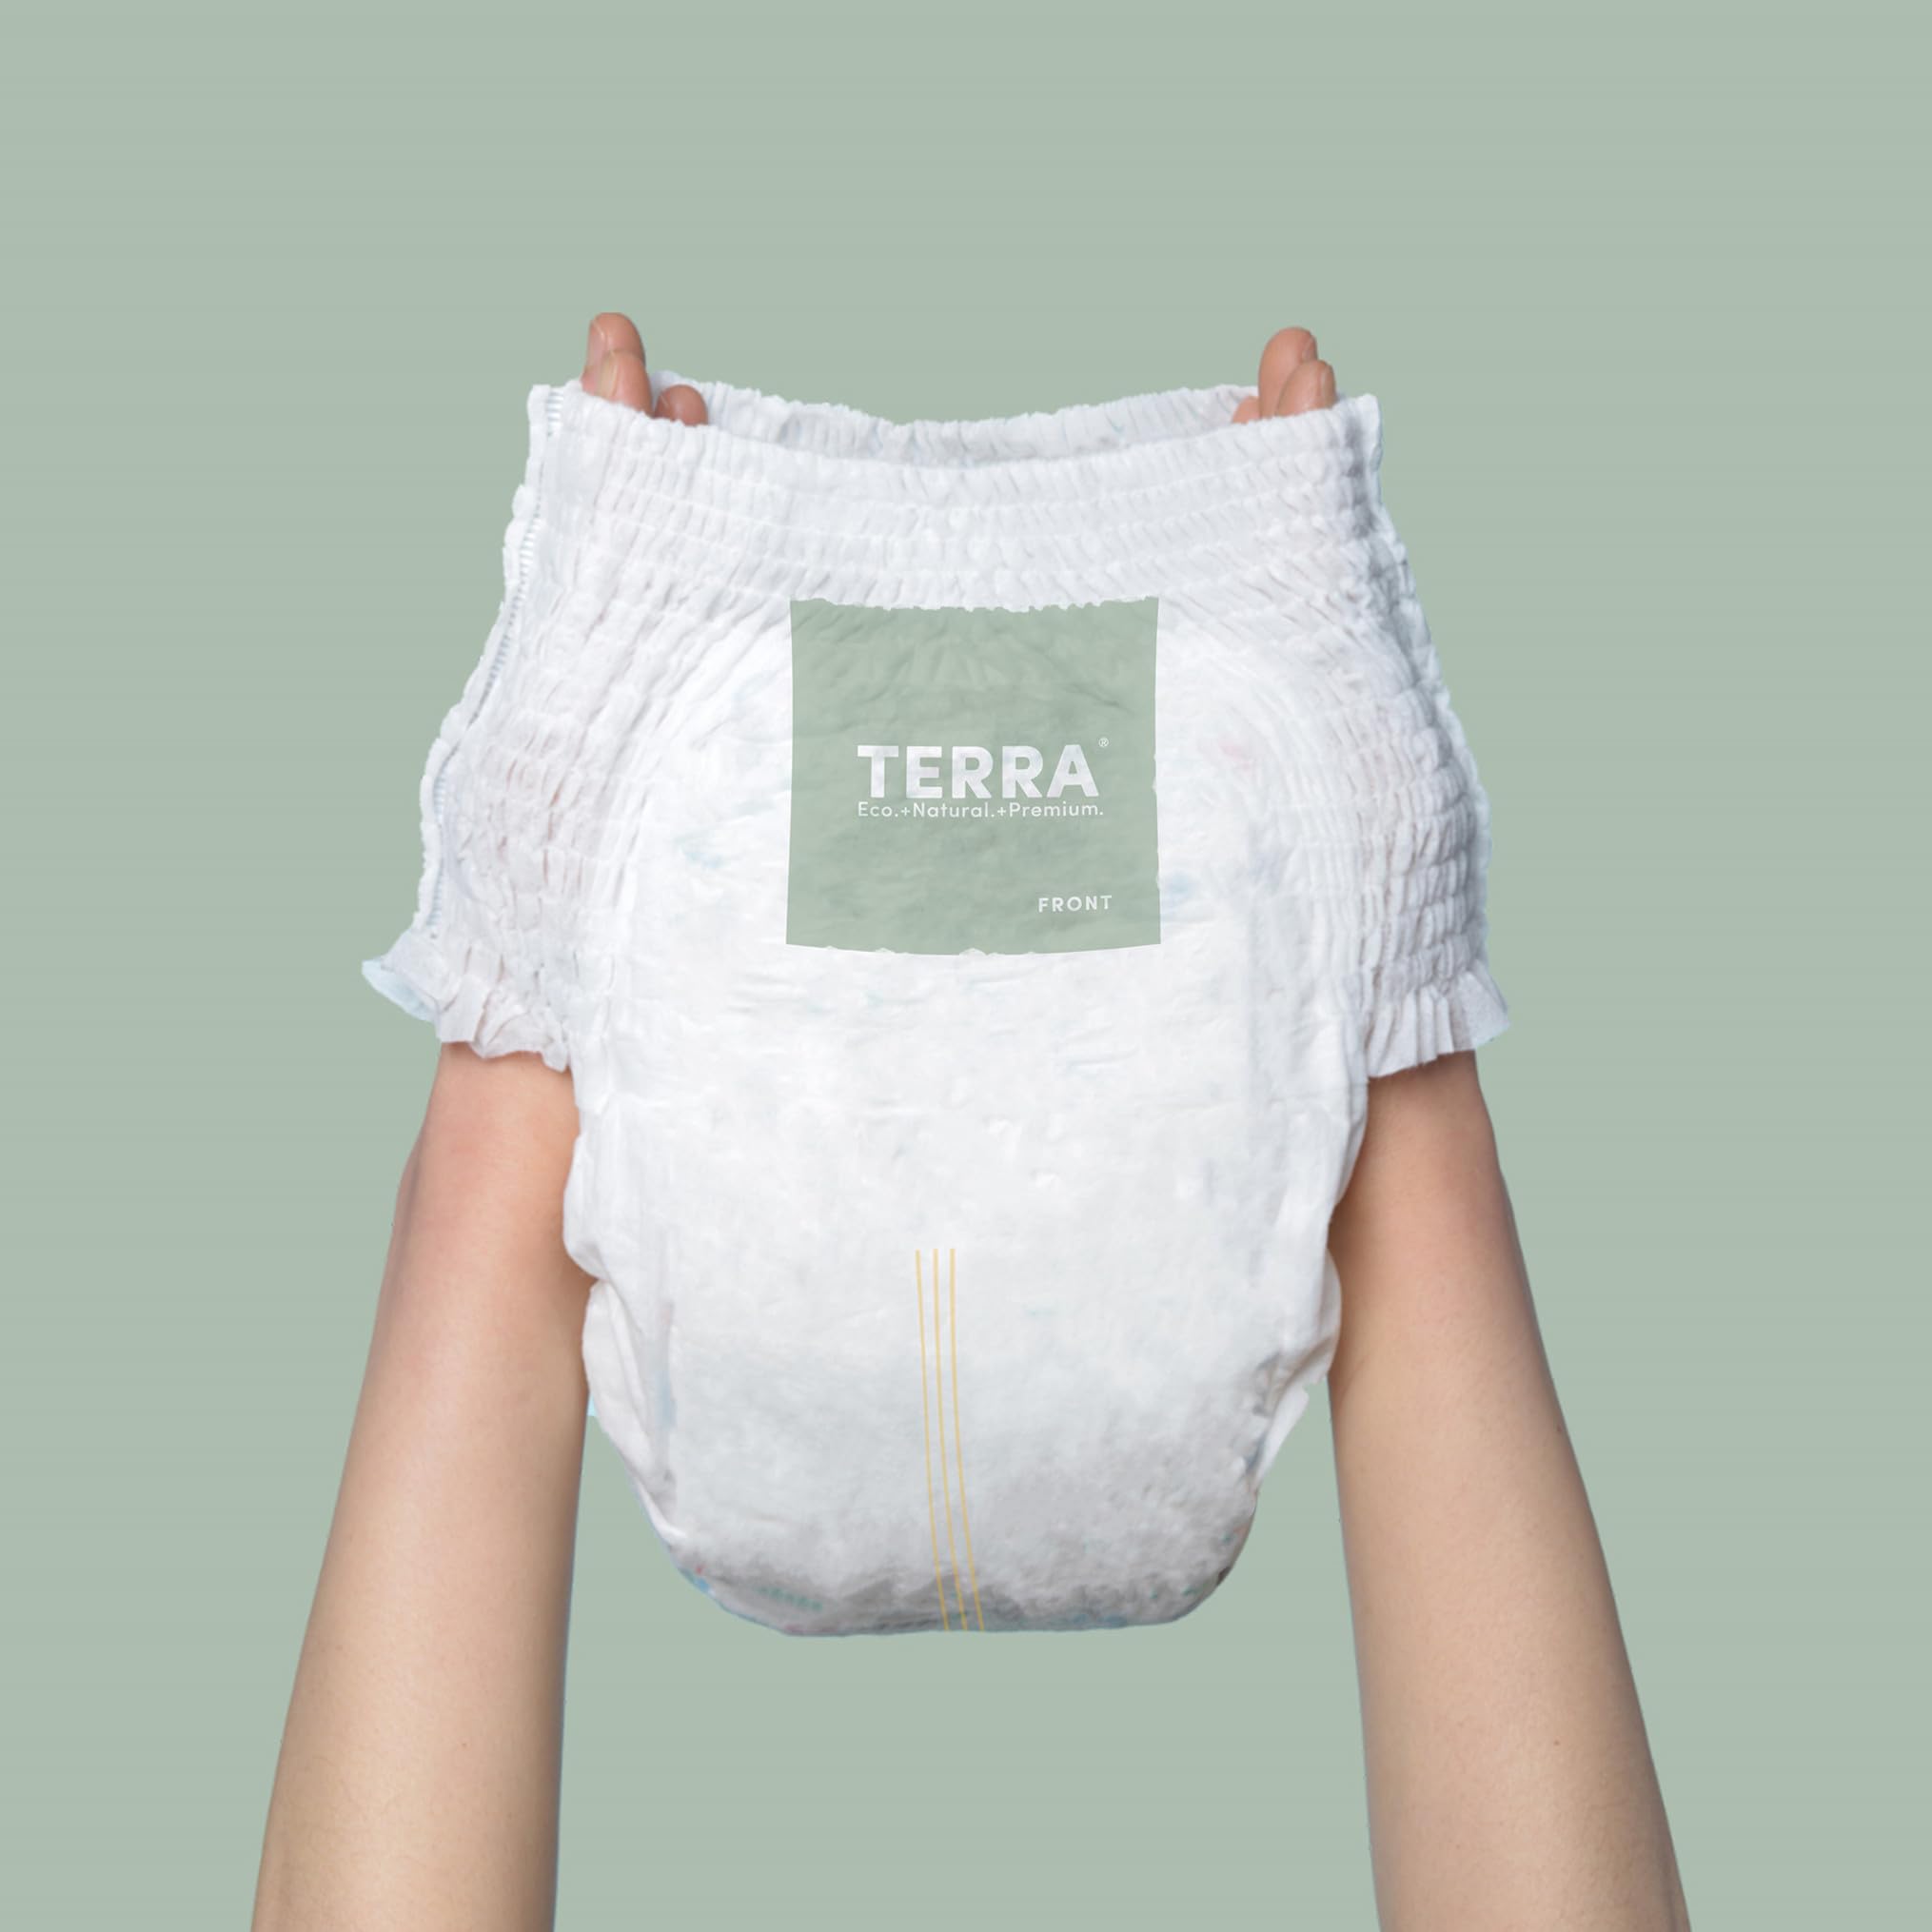 Terra Size 5 Training Pants– 85% Plant Based Pull-Up Style Diapers, Ultra-Soft & Chemical-Free for Sensitive Skin, Superior Absorbency, Perfect Overnight Diapers, for Toddlers 28-39 Pounds, 112 Count